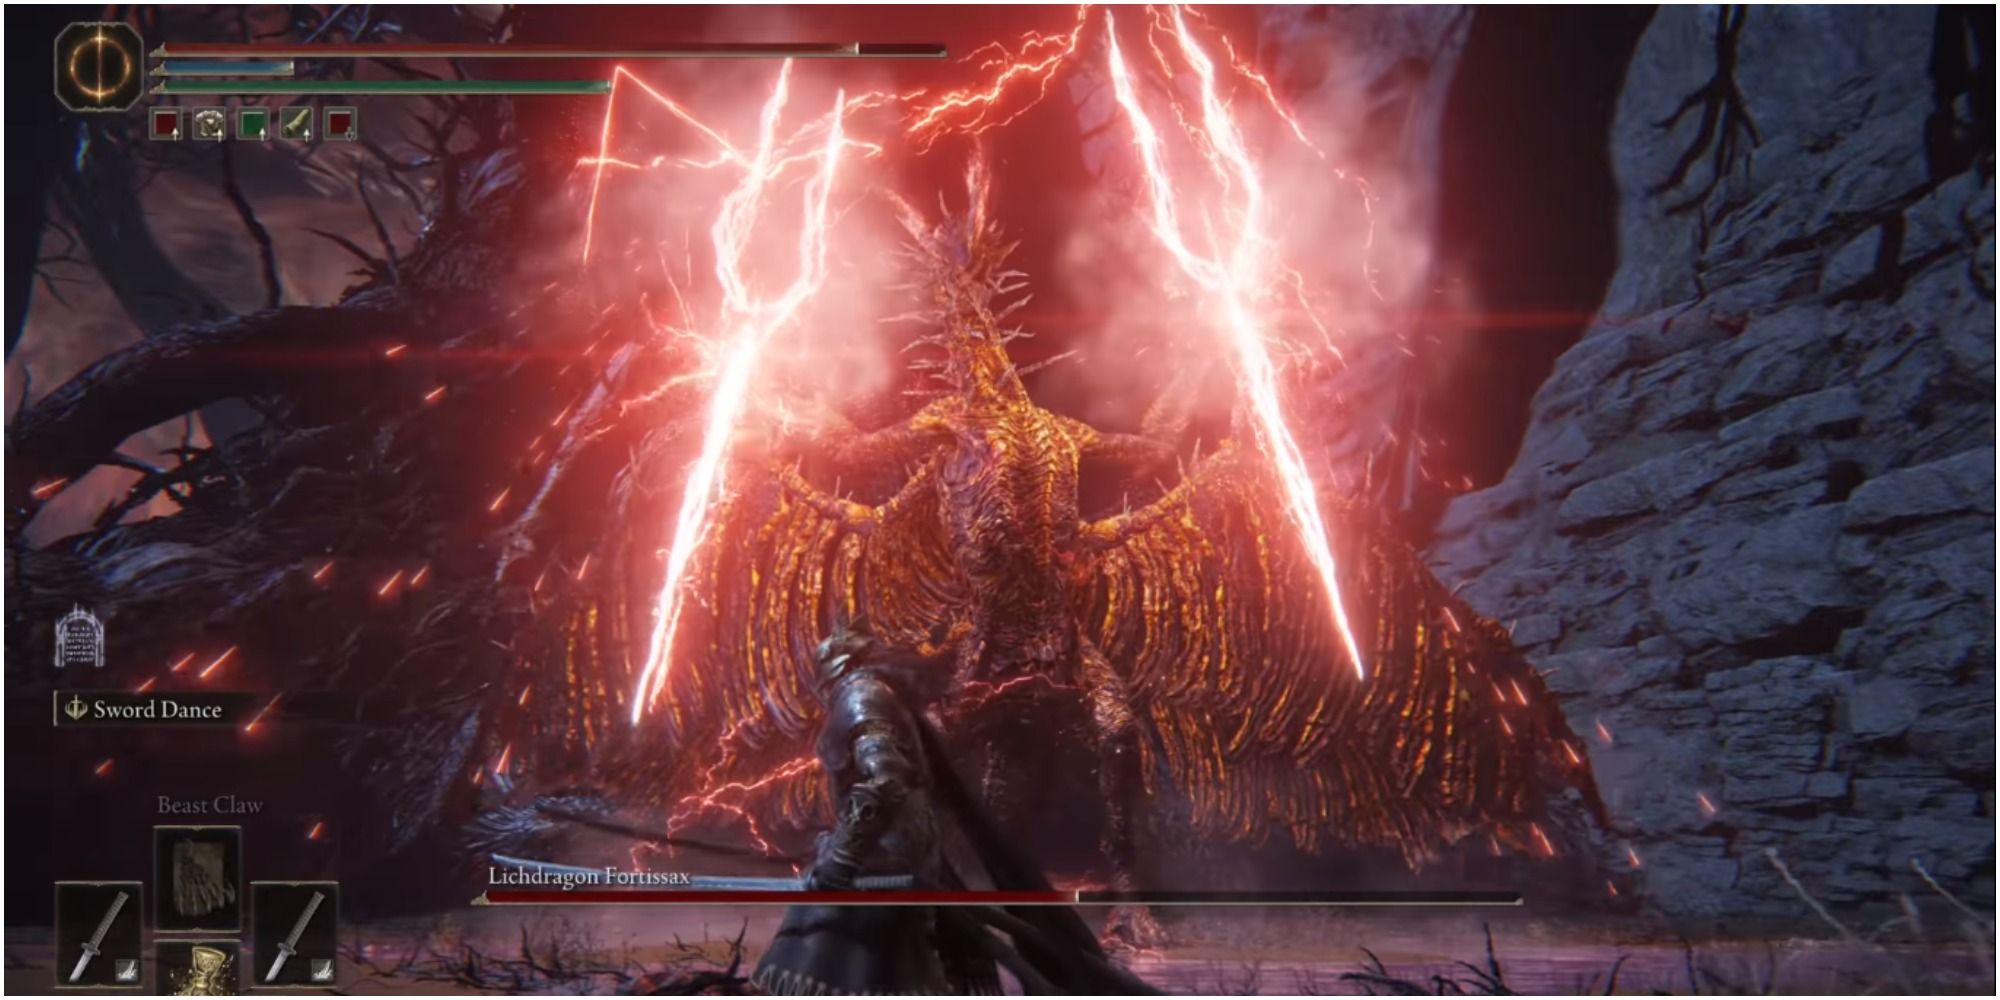 The boss using lightning spear in his hands.